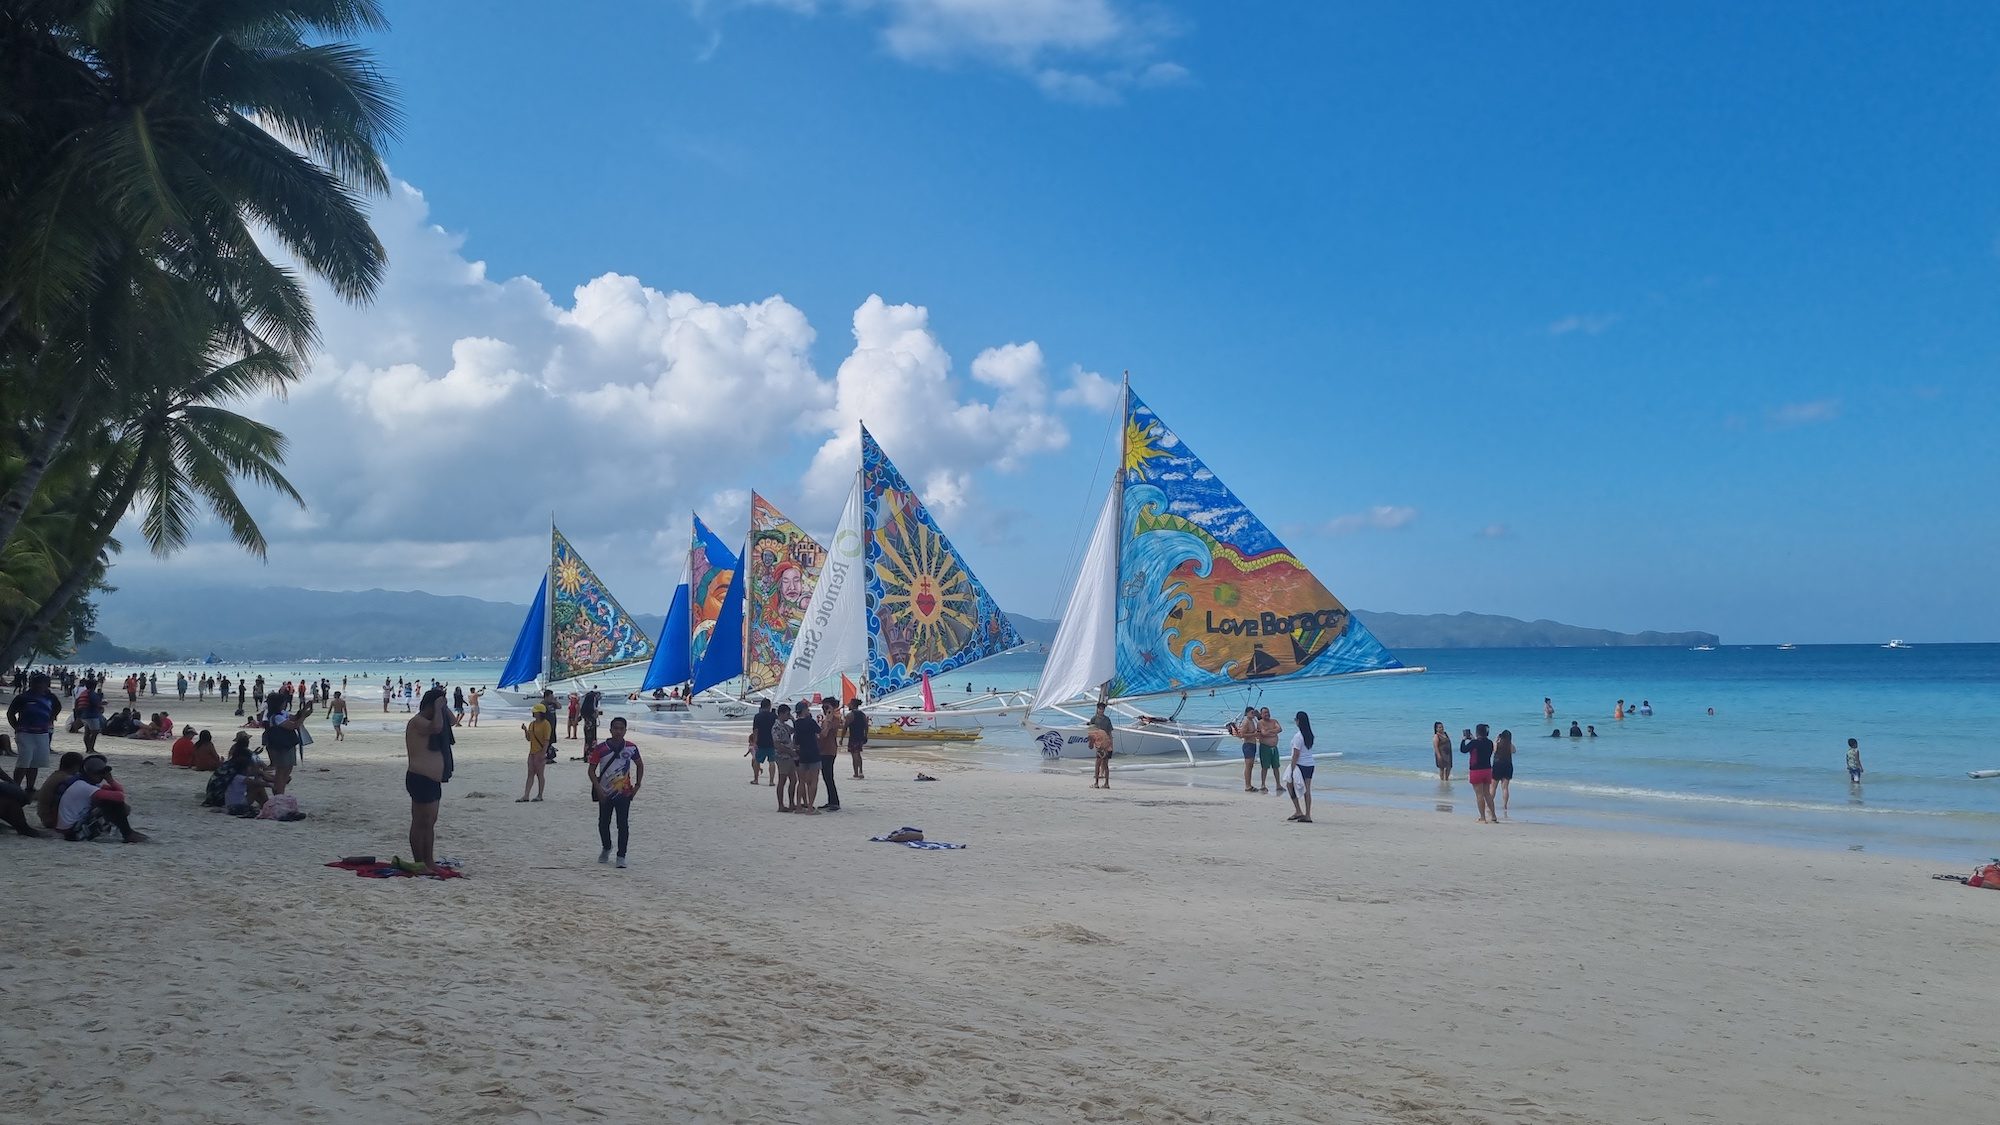 Diplomats urge Boracay execs to offer Halal food to attract more foreign tourists